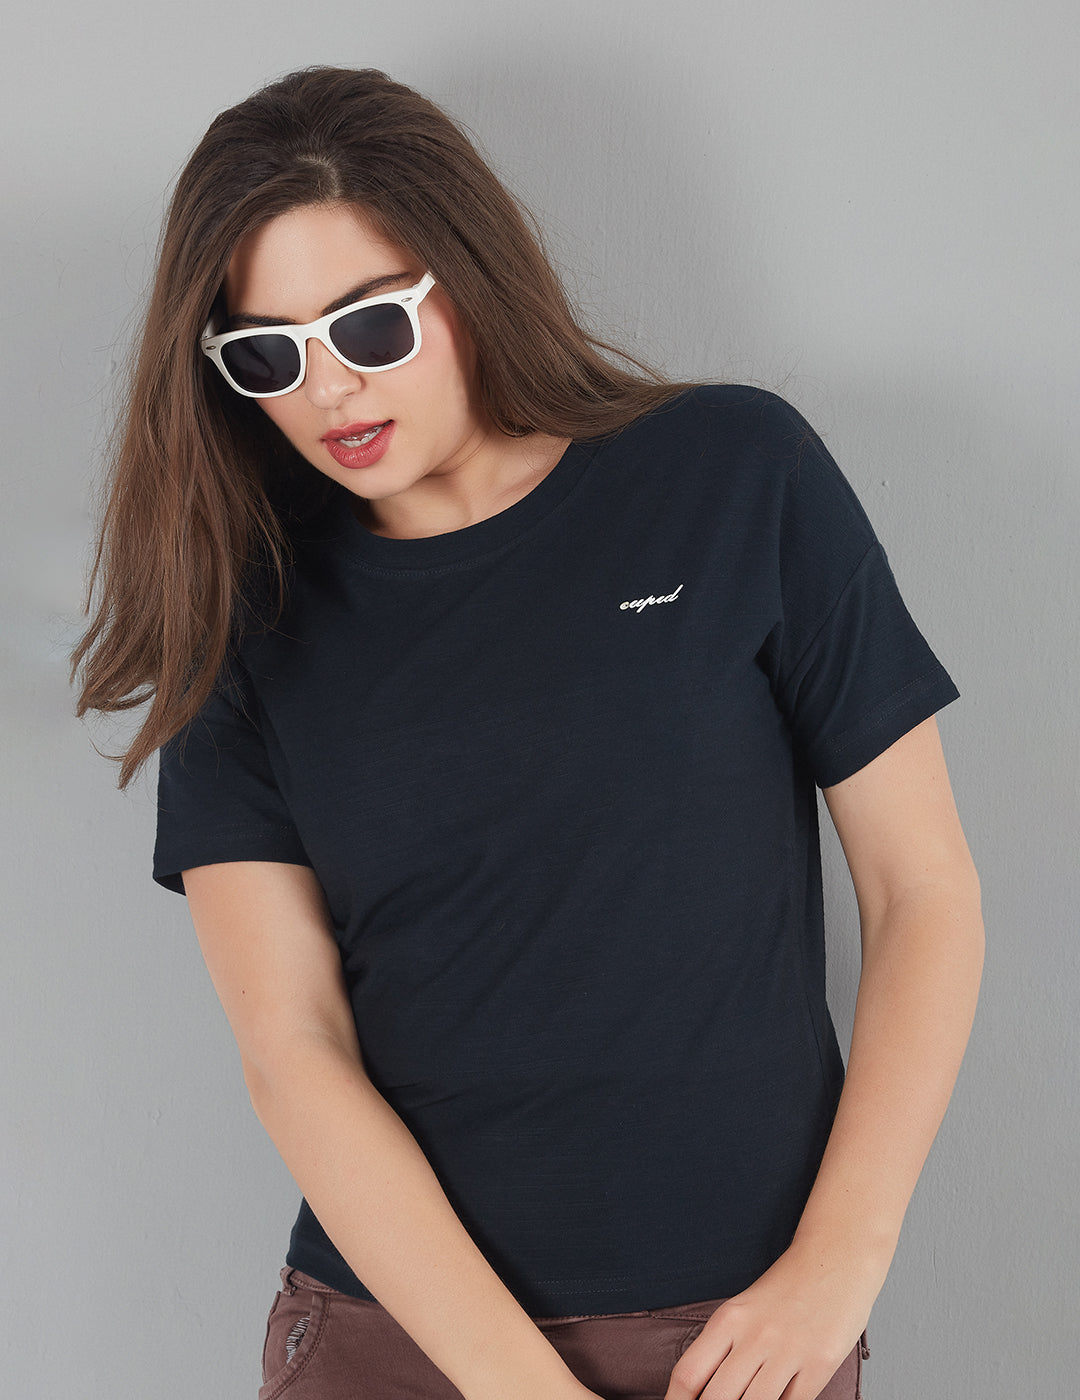 Stylish Plain Short T-Shirts for women In Imperial Blue At Best Price